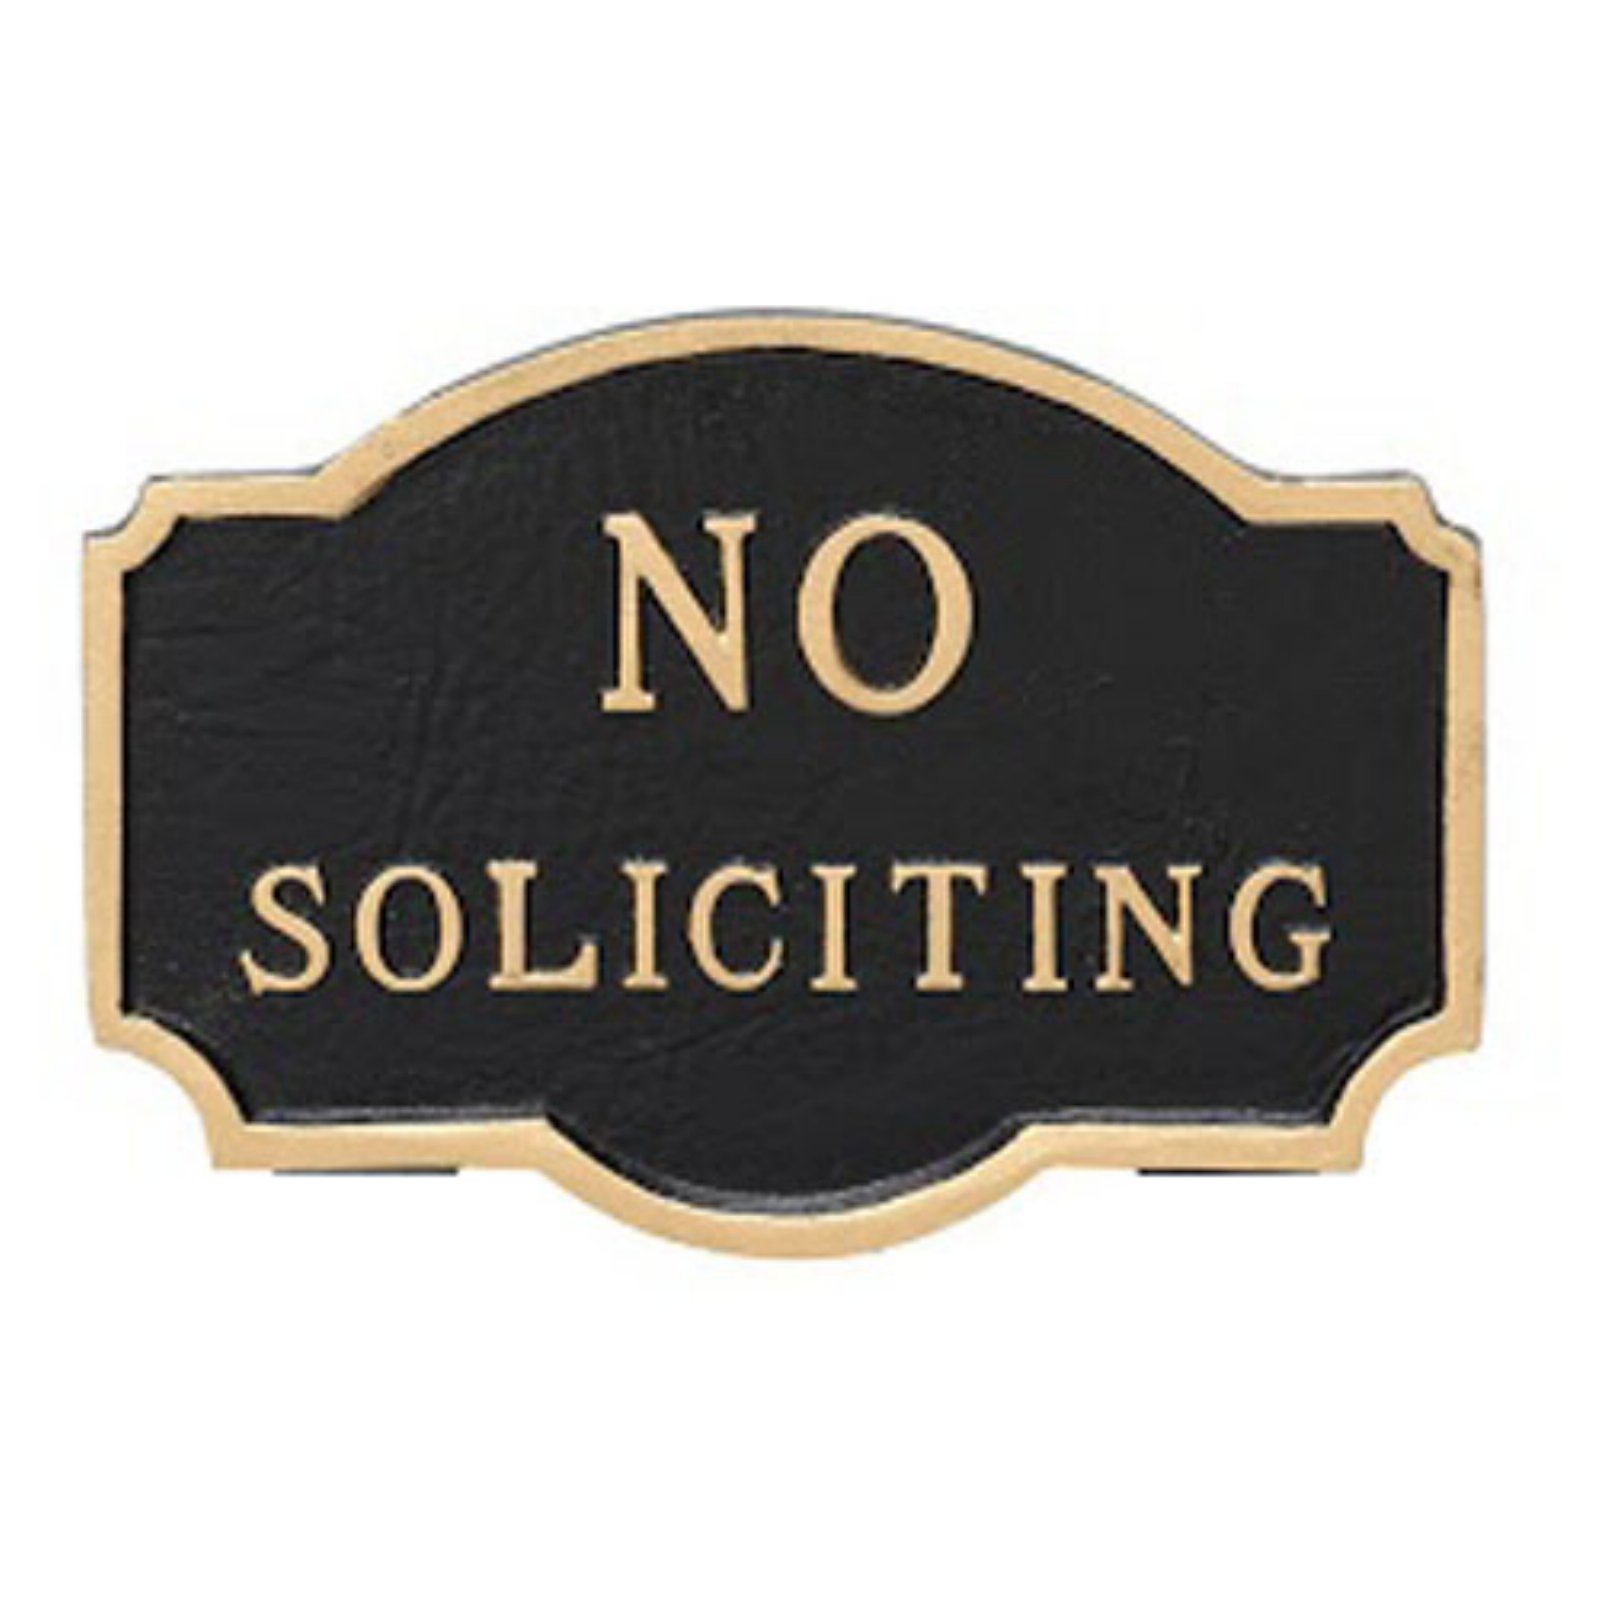 montague metal products petite montague no soliciting statement plaque, black with silver letter, 4.5" x 7.15" - image 2 of 2